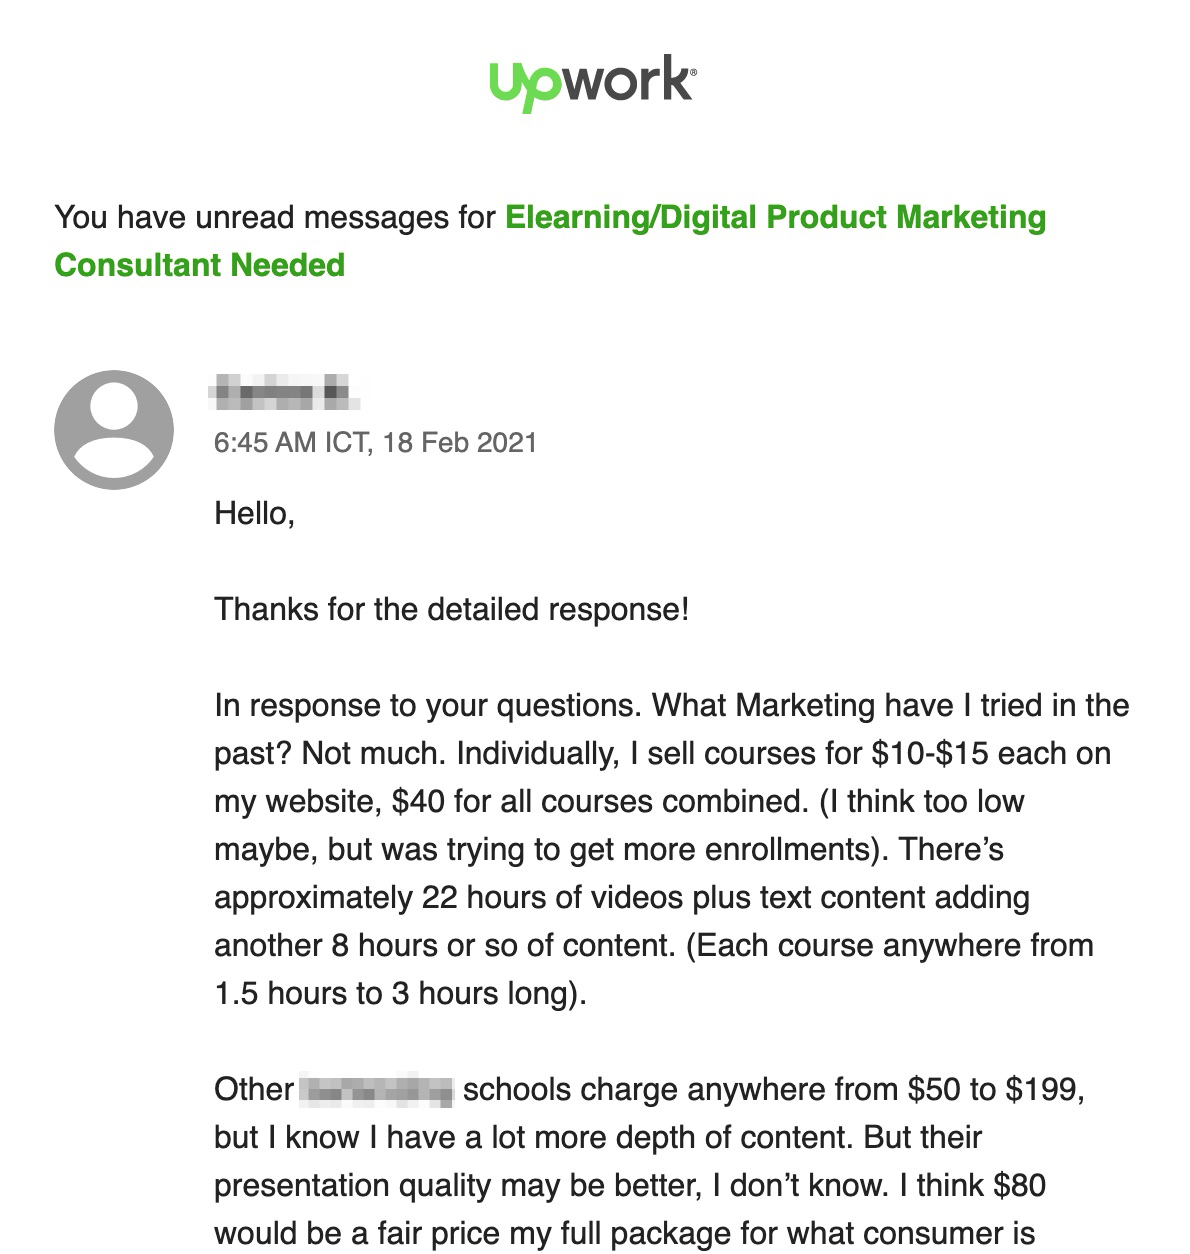 attractive cover letter for upwork